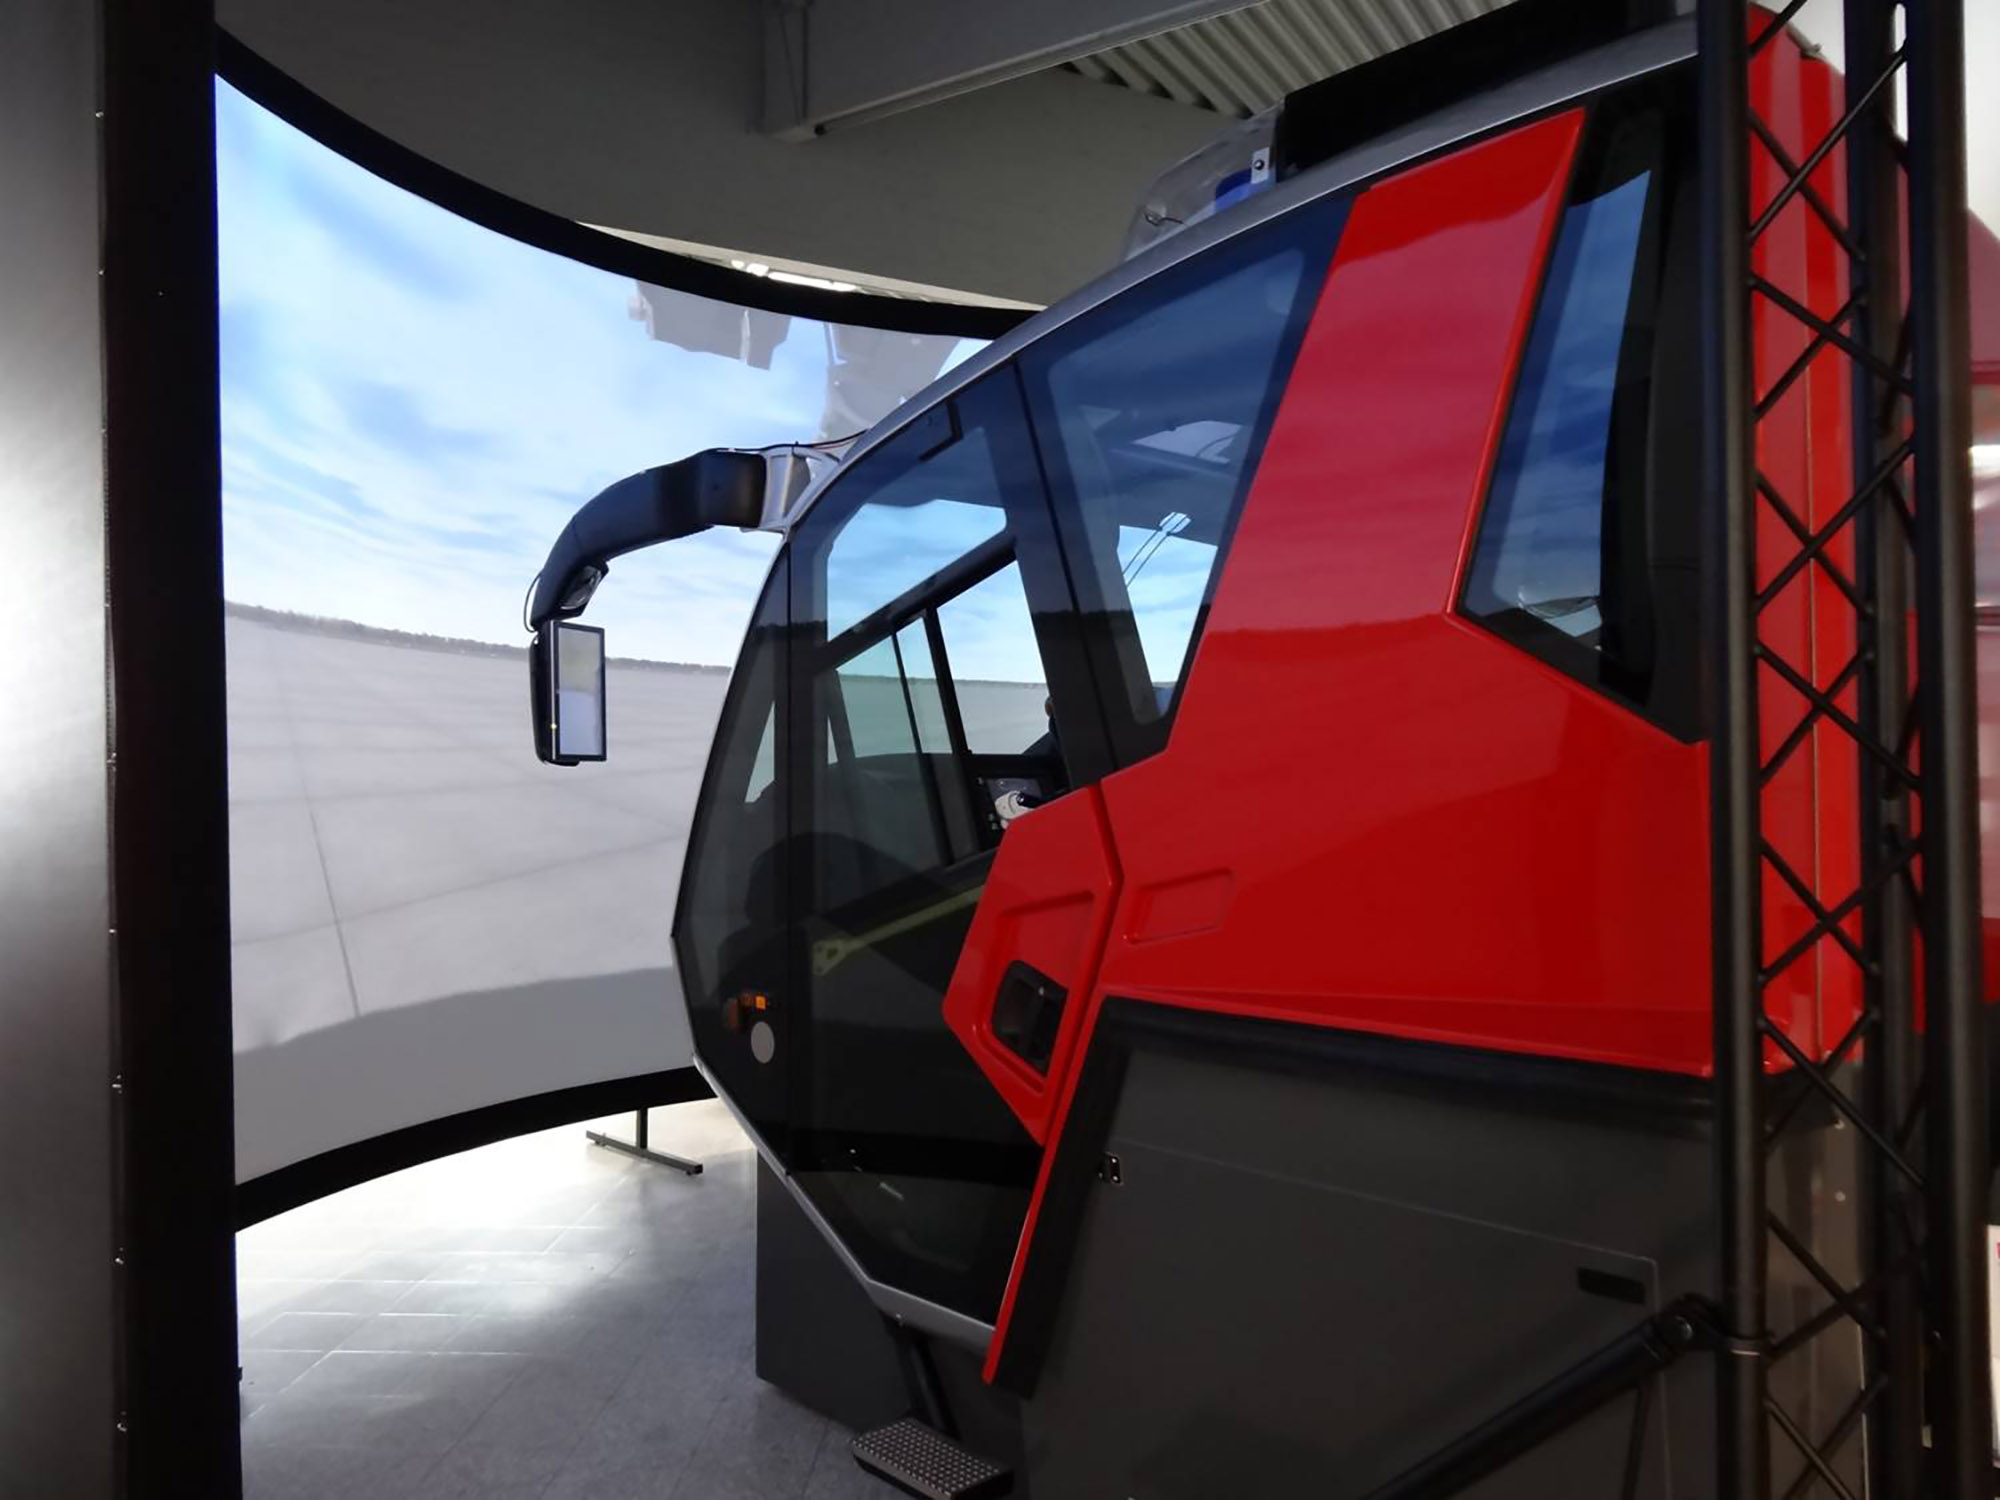 Full-sized Rosenbauer Panther Cabin with a 210-degree projection screen for full immersion to train ARFF Operations.  